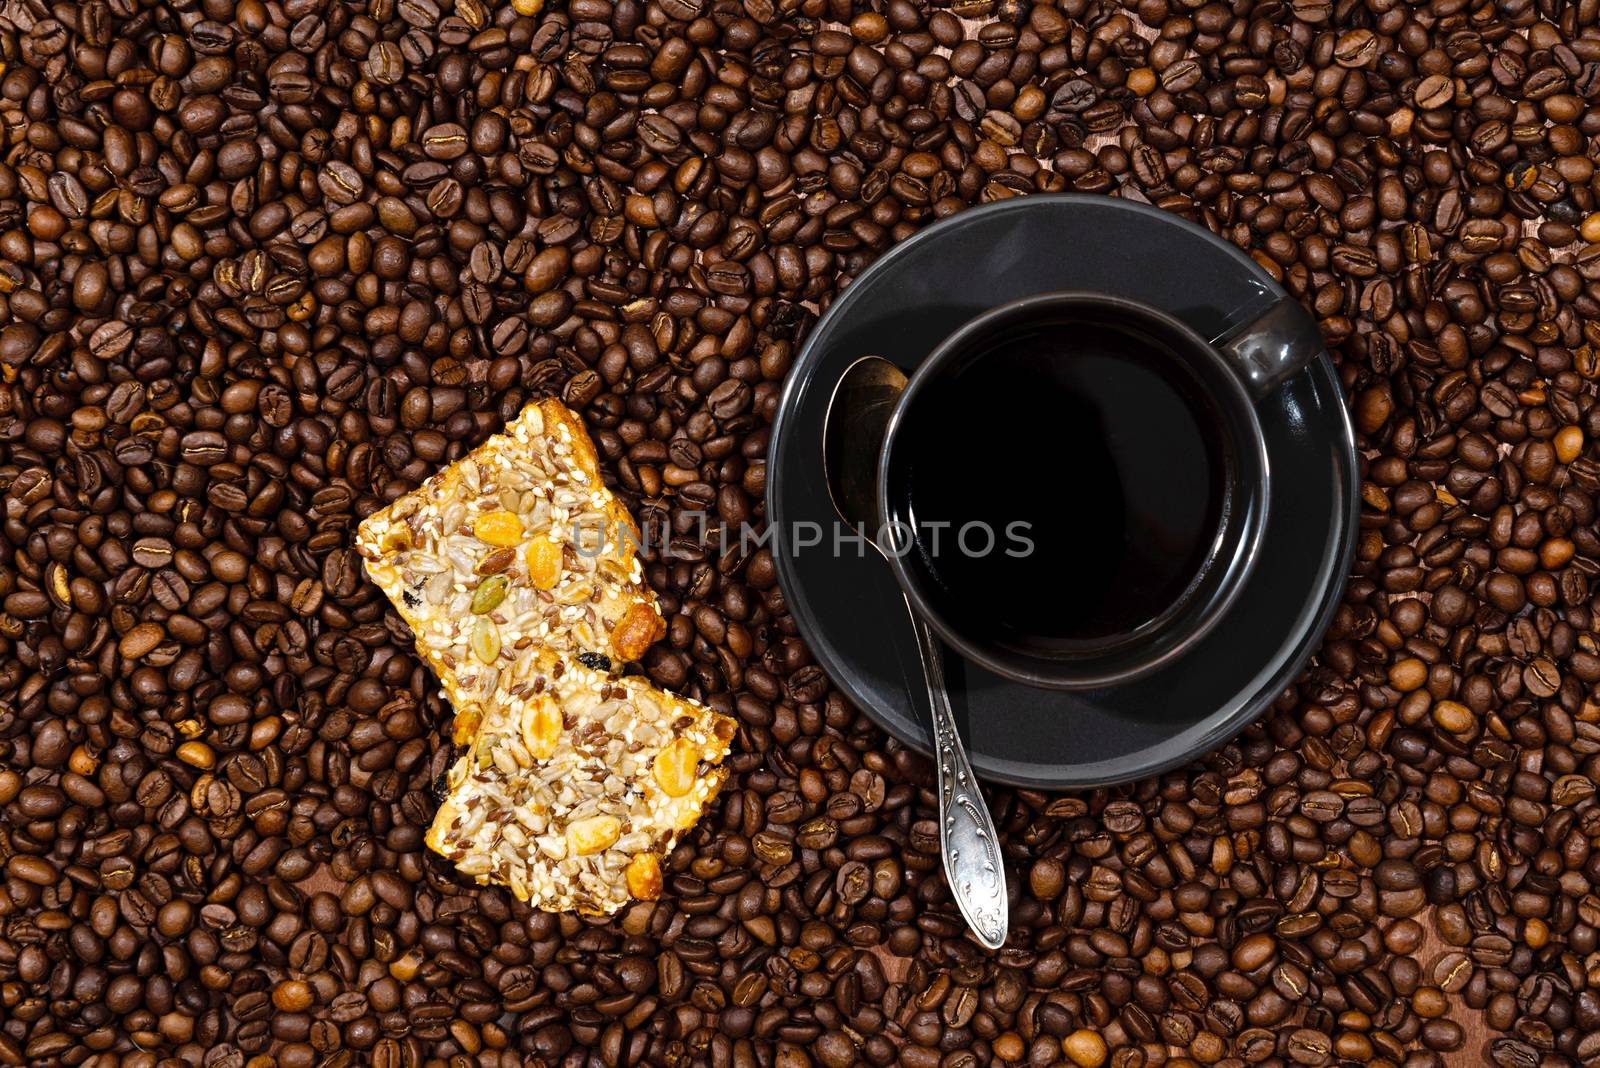 White coffee mug and cookies on the coffee beans background - image